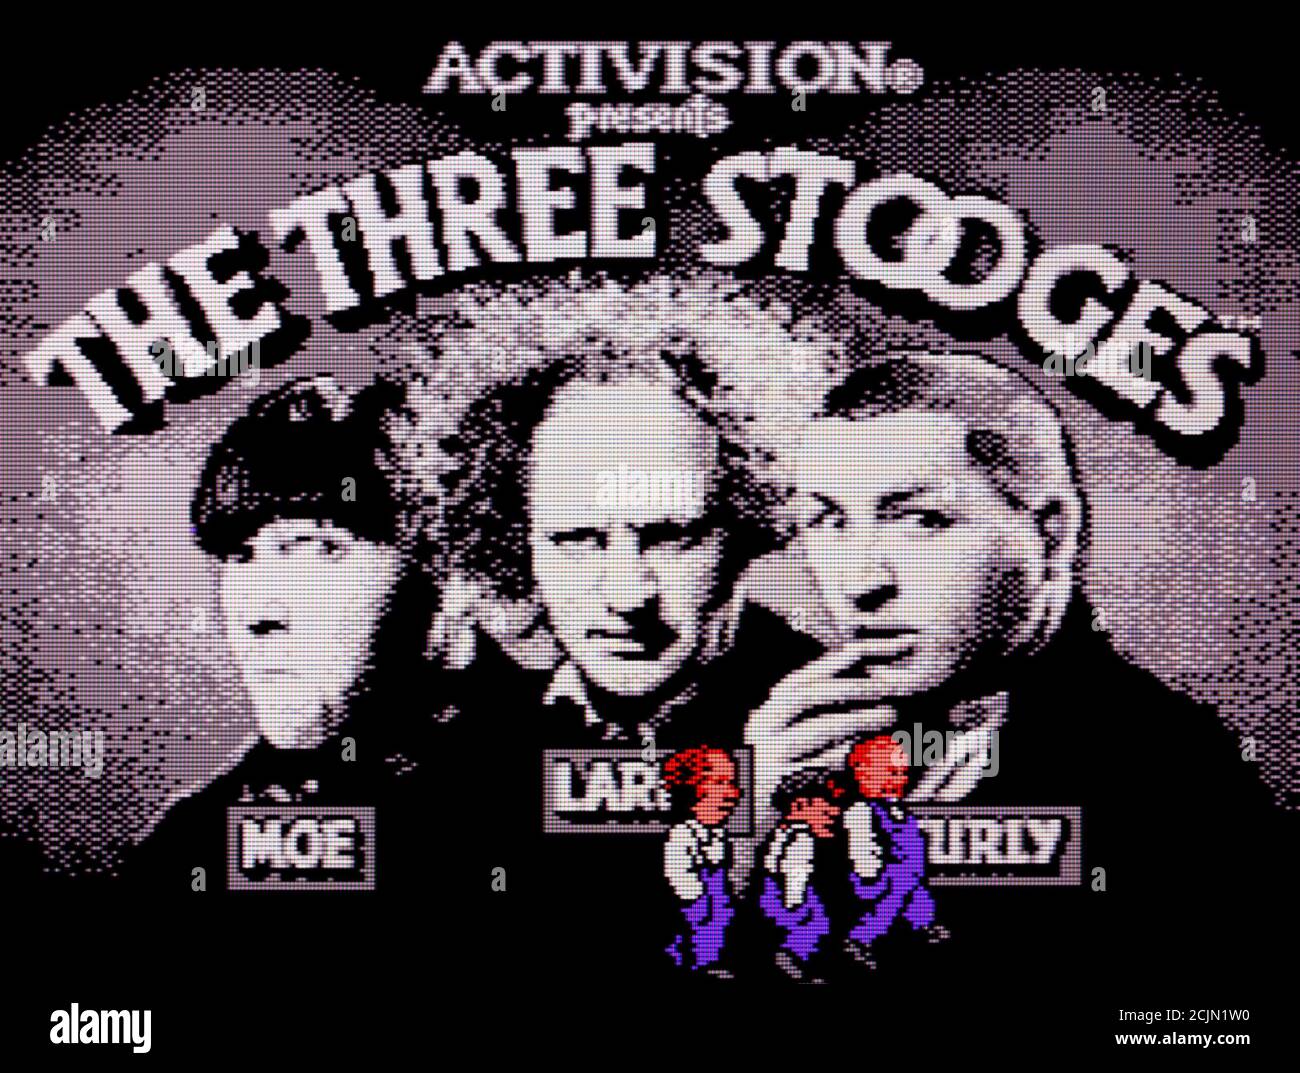 The Three Stooges - Nintendo Entertainment System - NES Videogame - Editorial use only Stock Photo